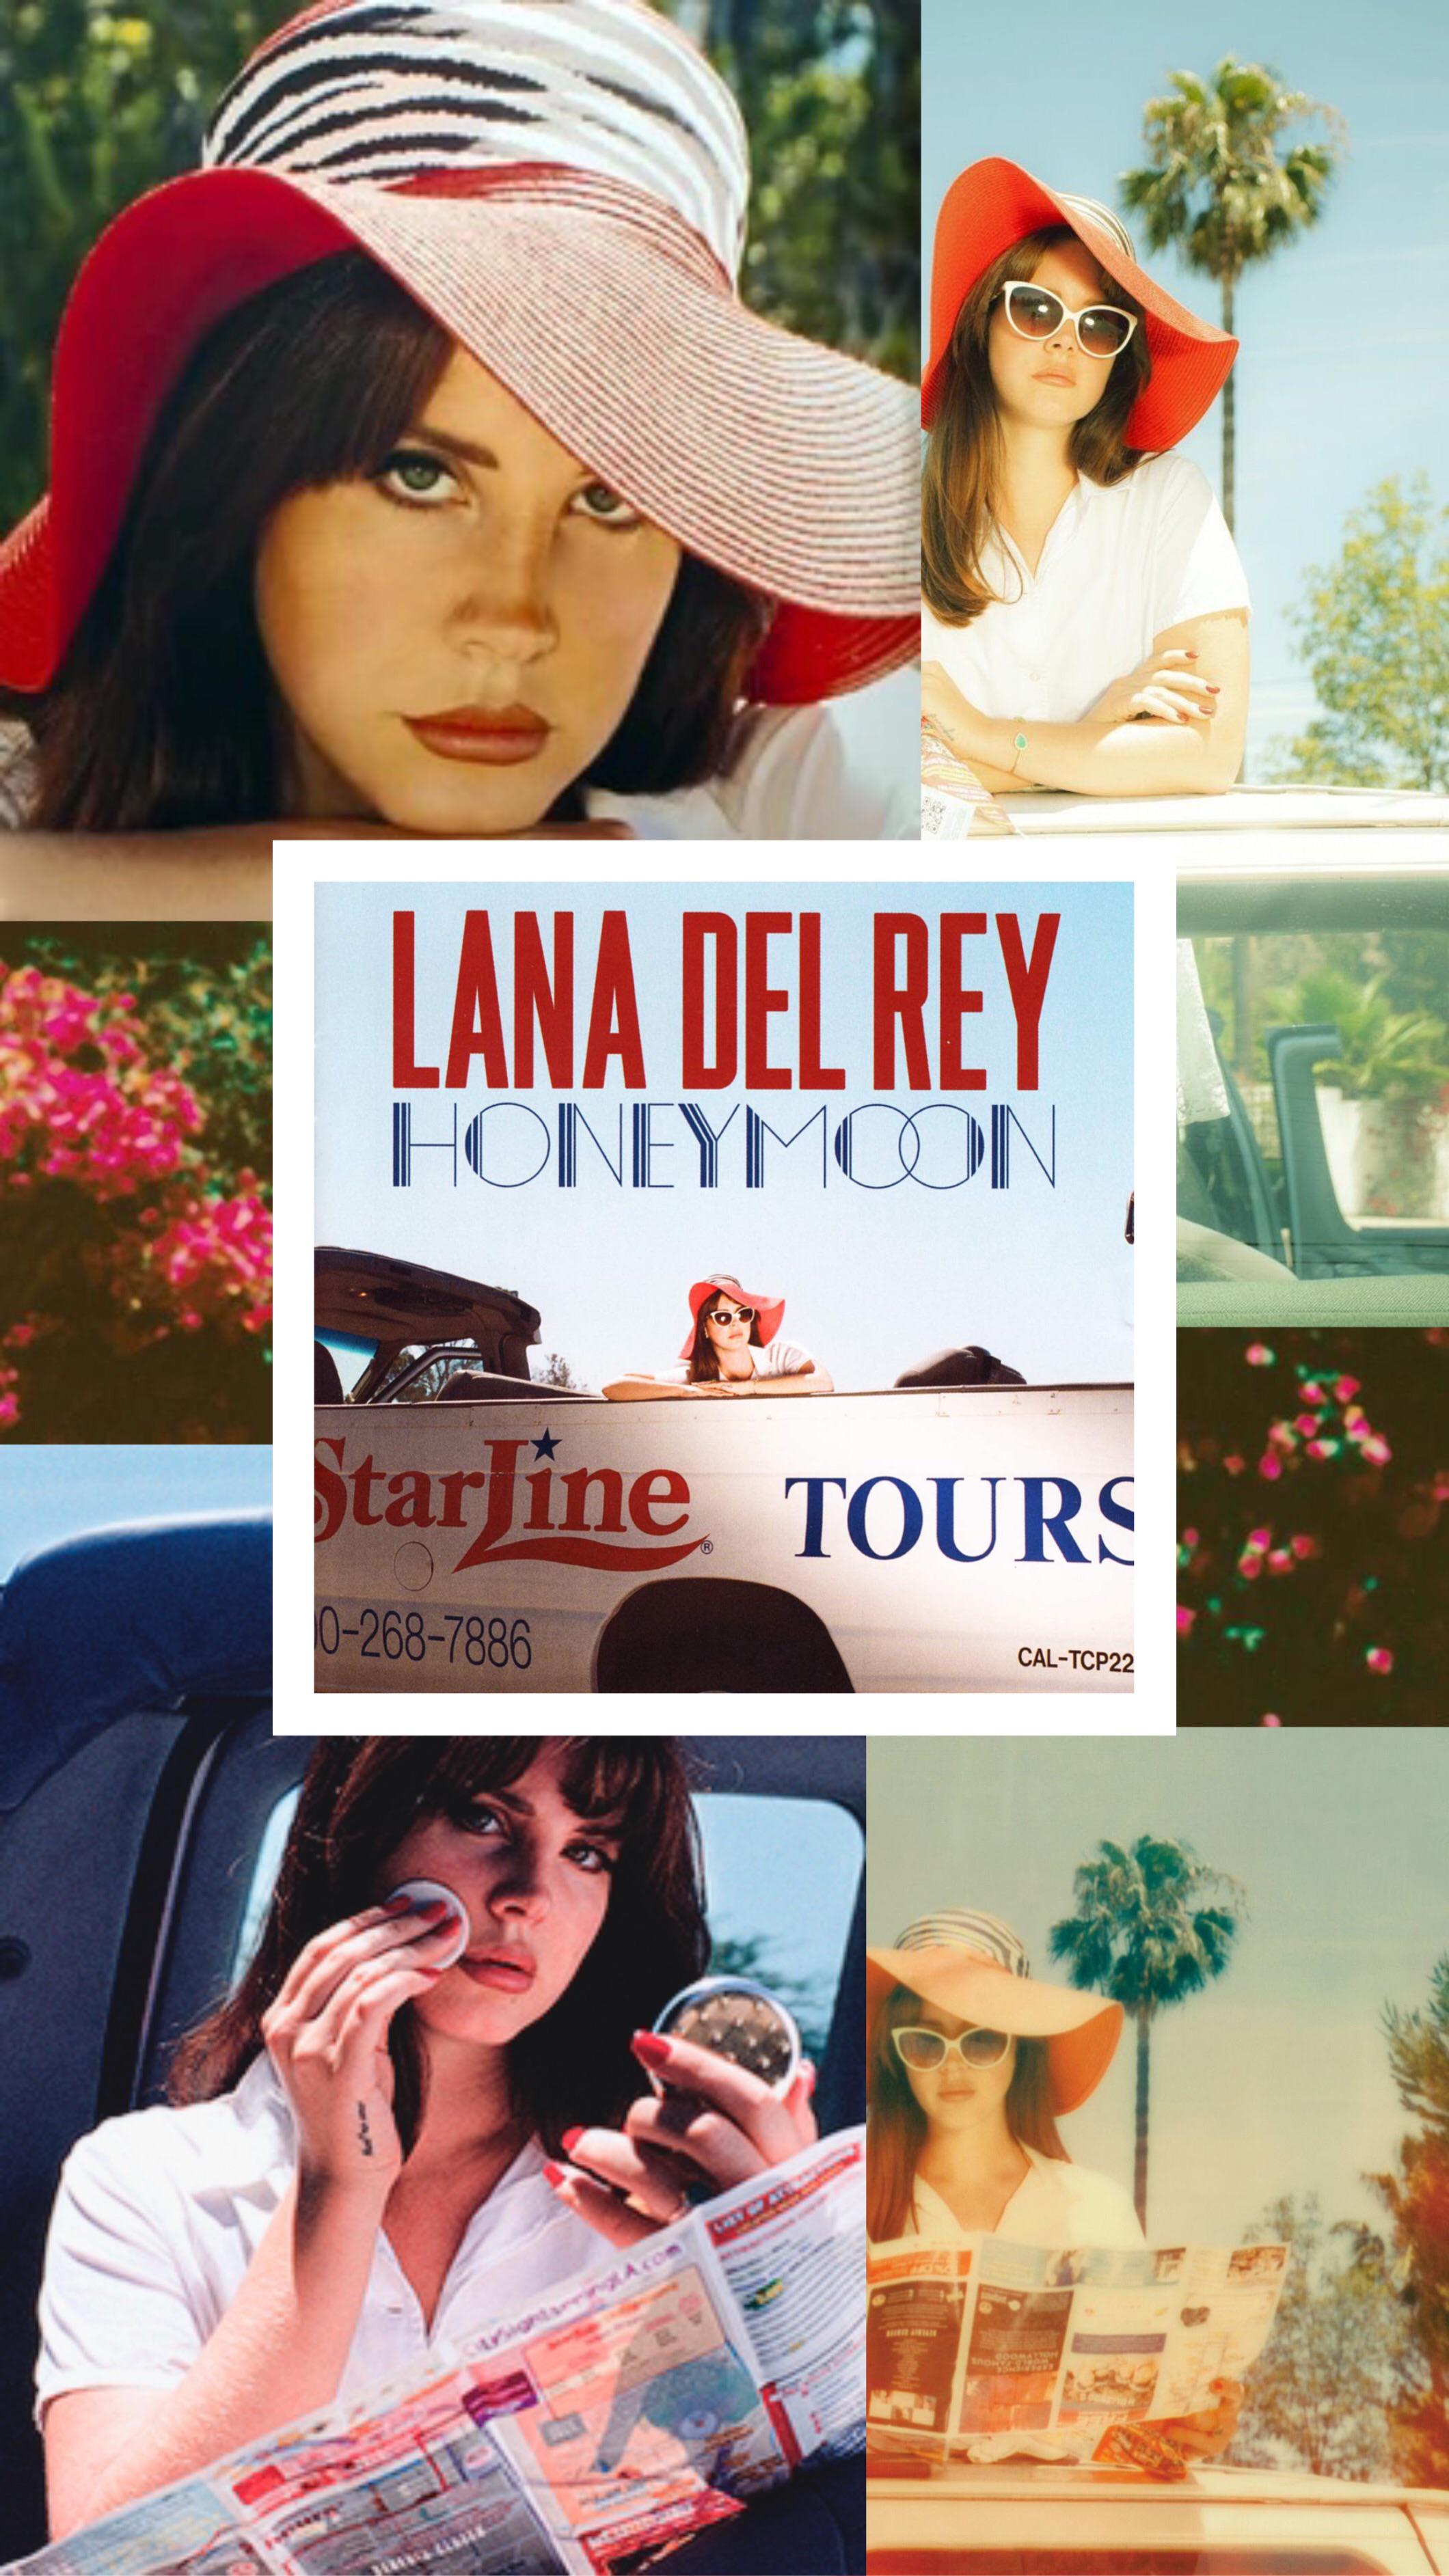 Hey Guys, I Made A Wallpaper Collage For My Favorite LDR Album, Honeymoon. You Can Use It If You Want!: Lanadelrey